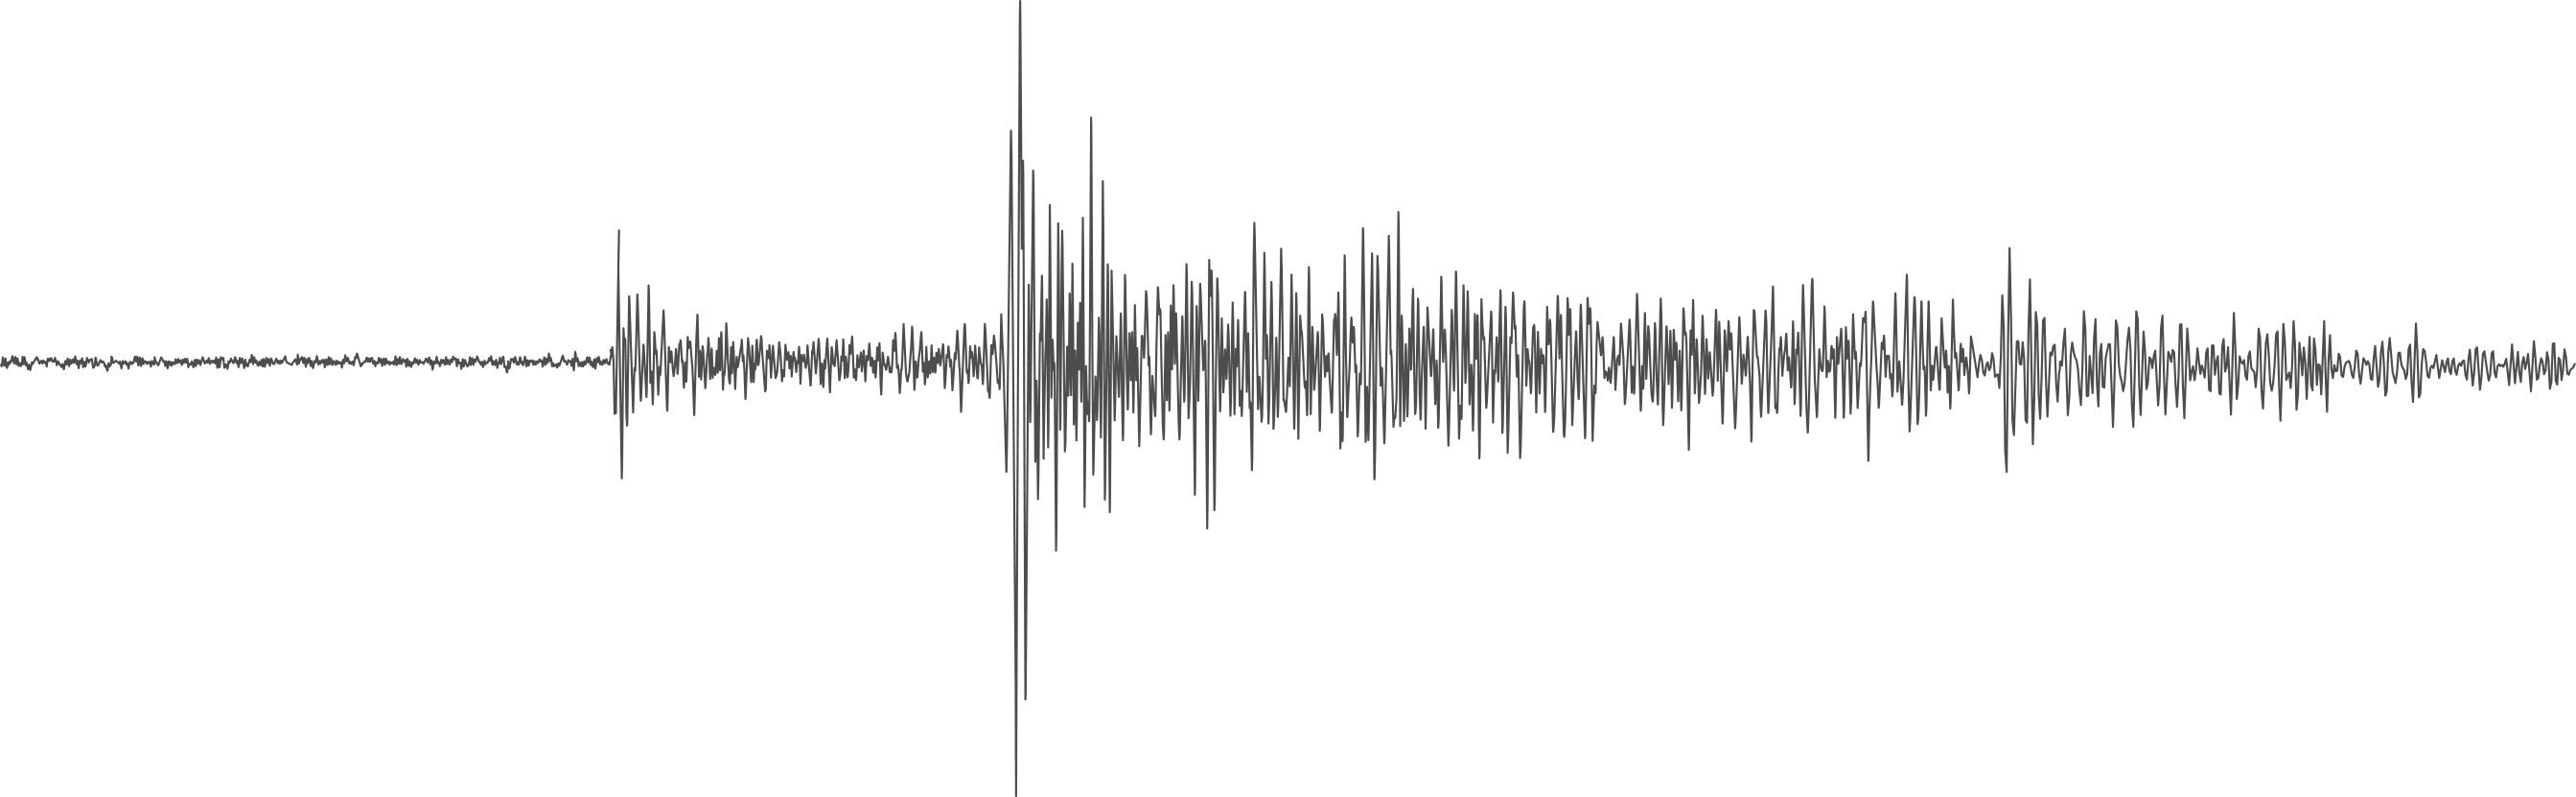 PIA24761: Seismogram From Mars